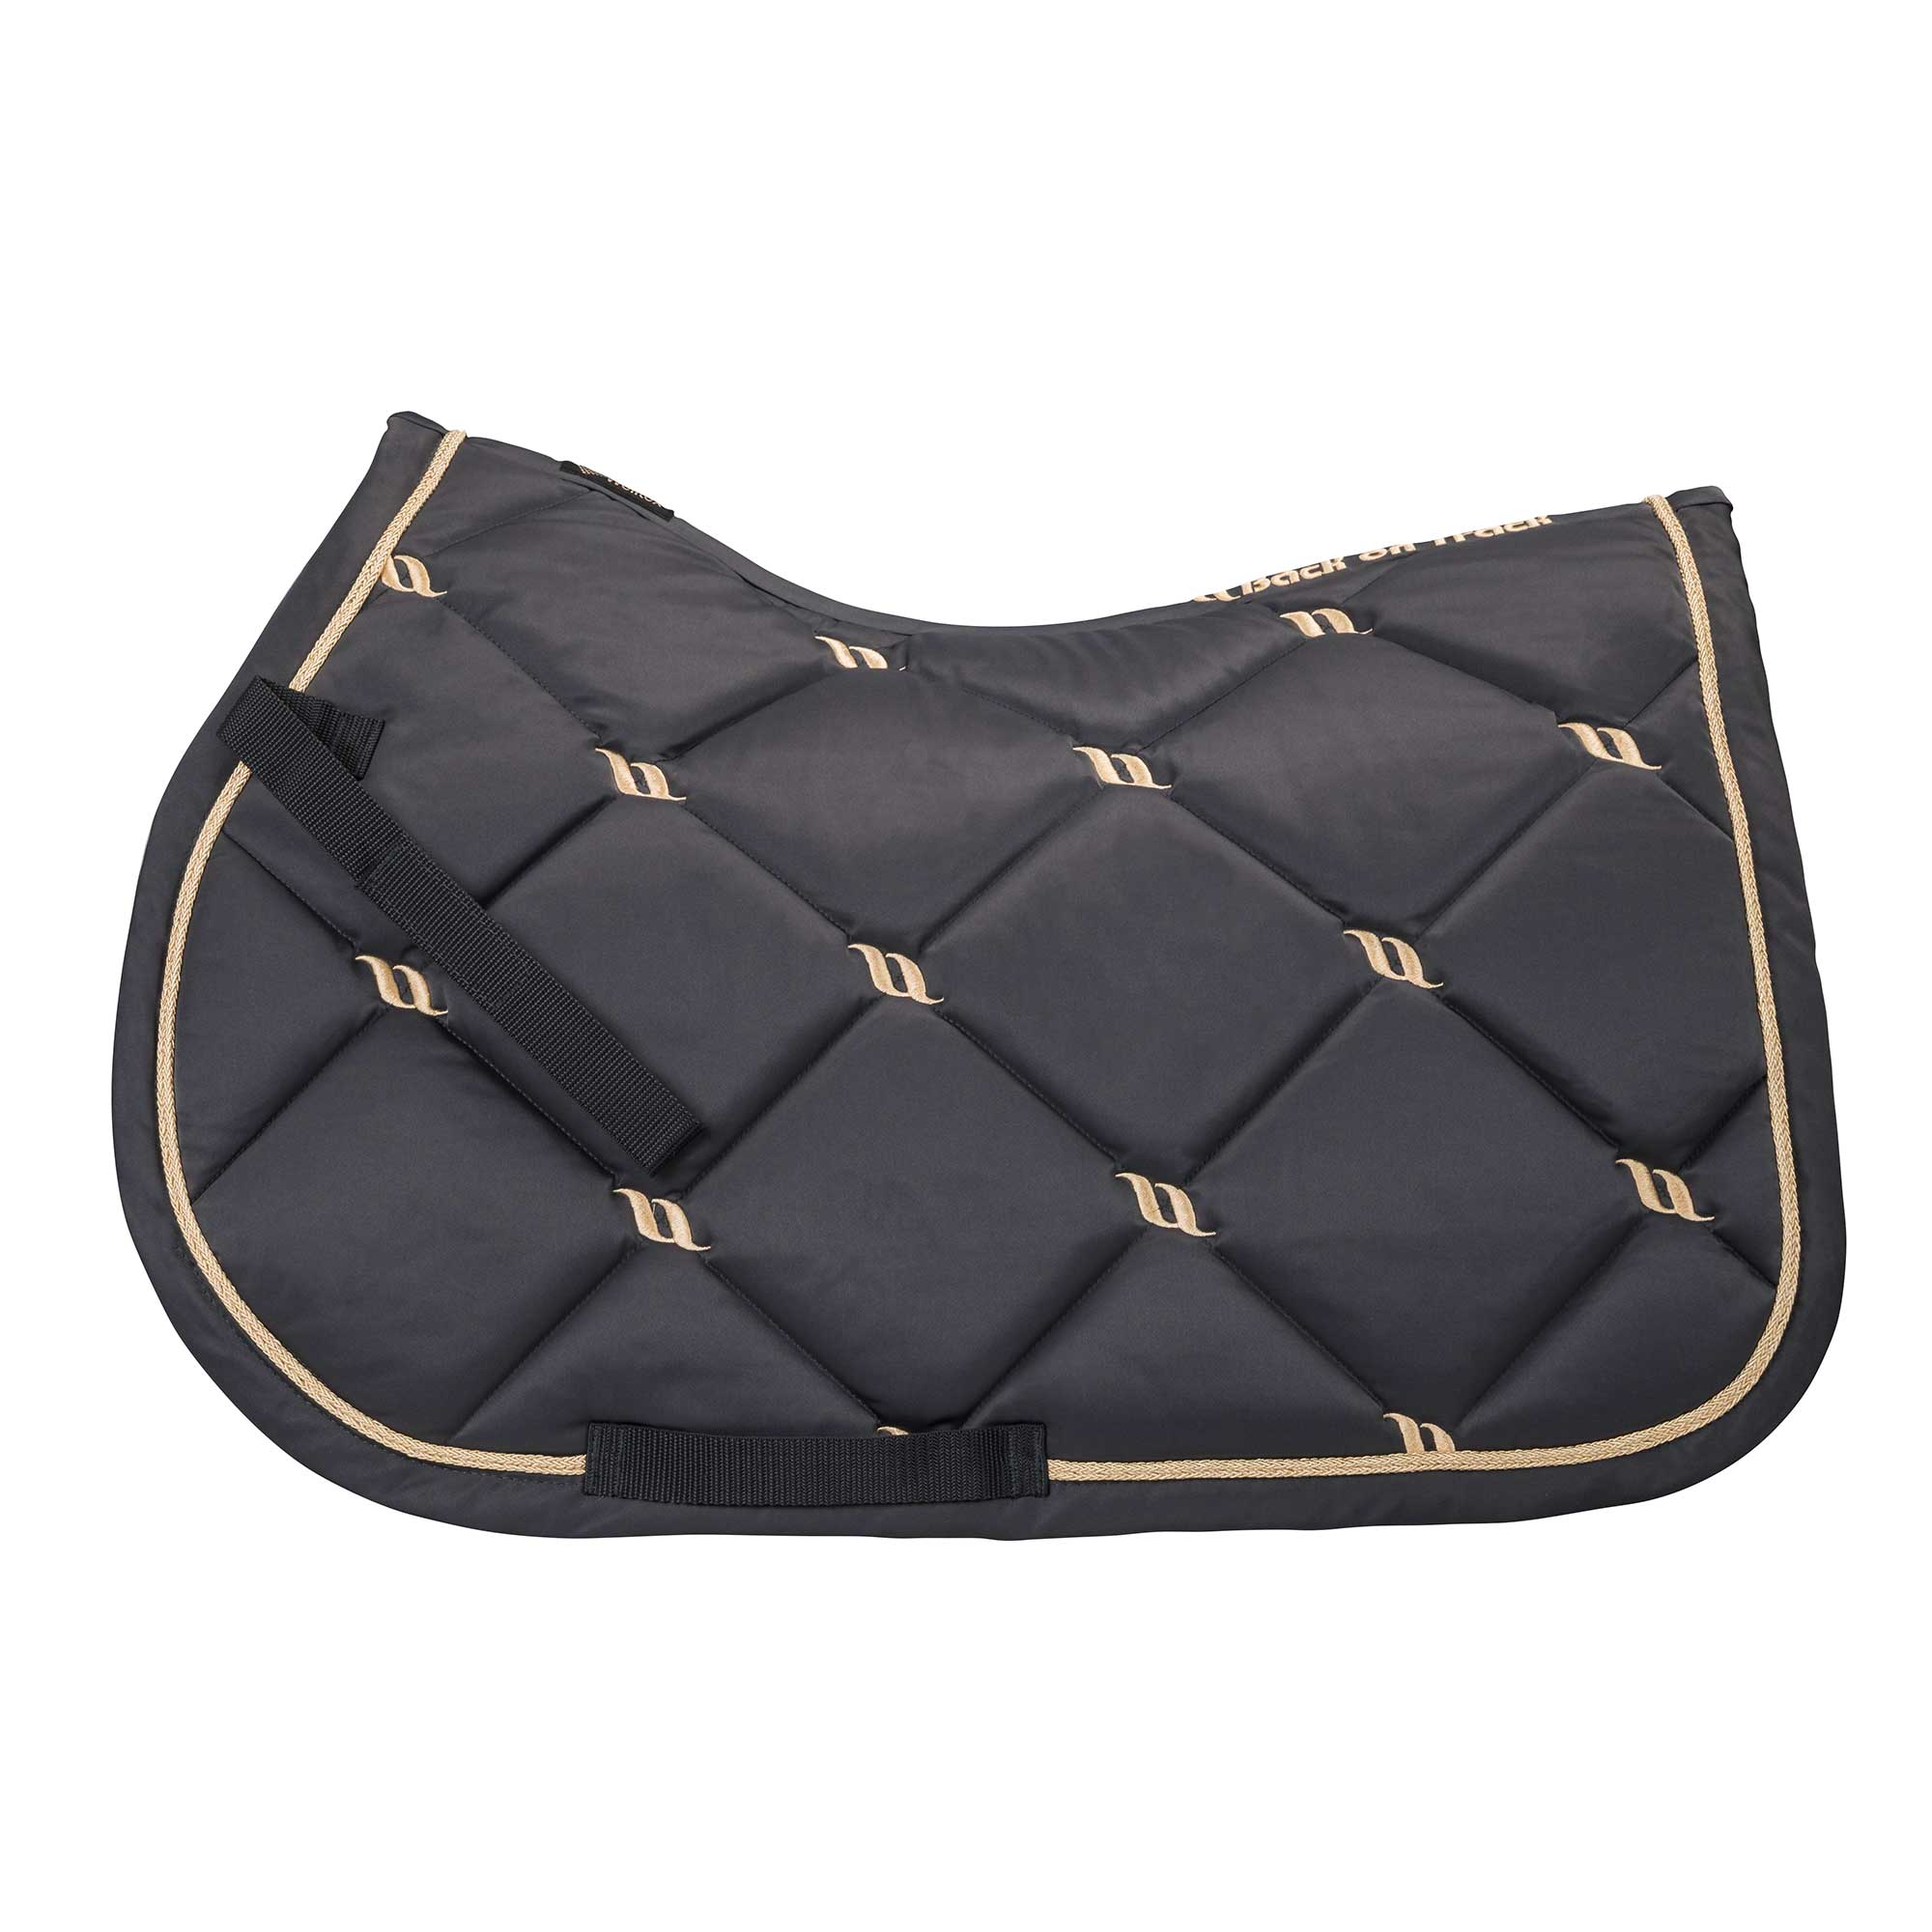 "Nights Collection" Saddle Pad Jumping Graphite